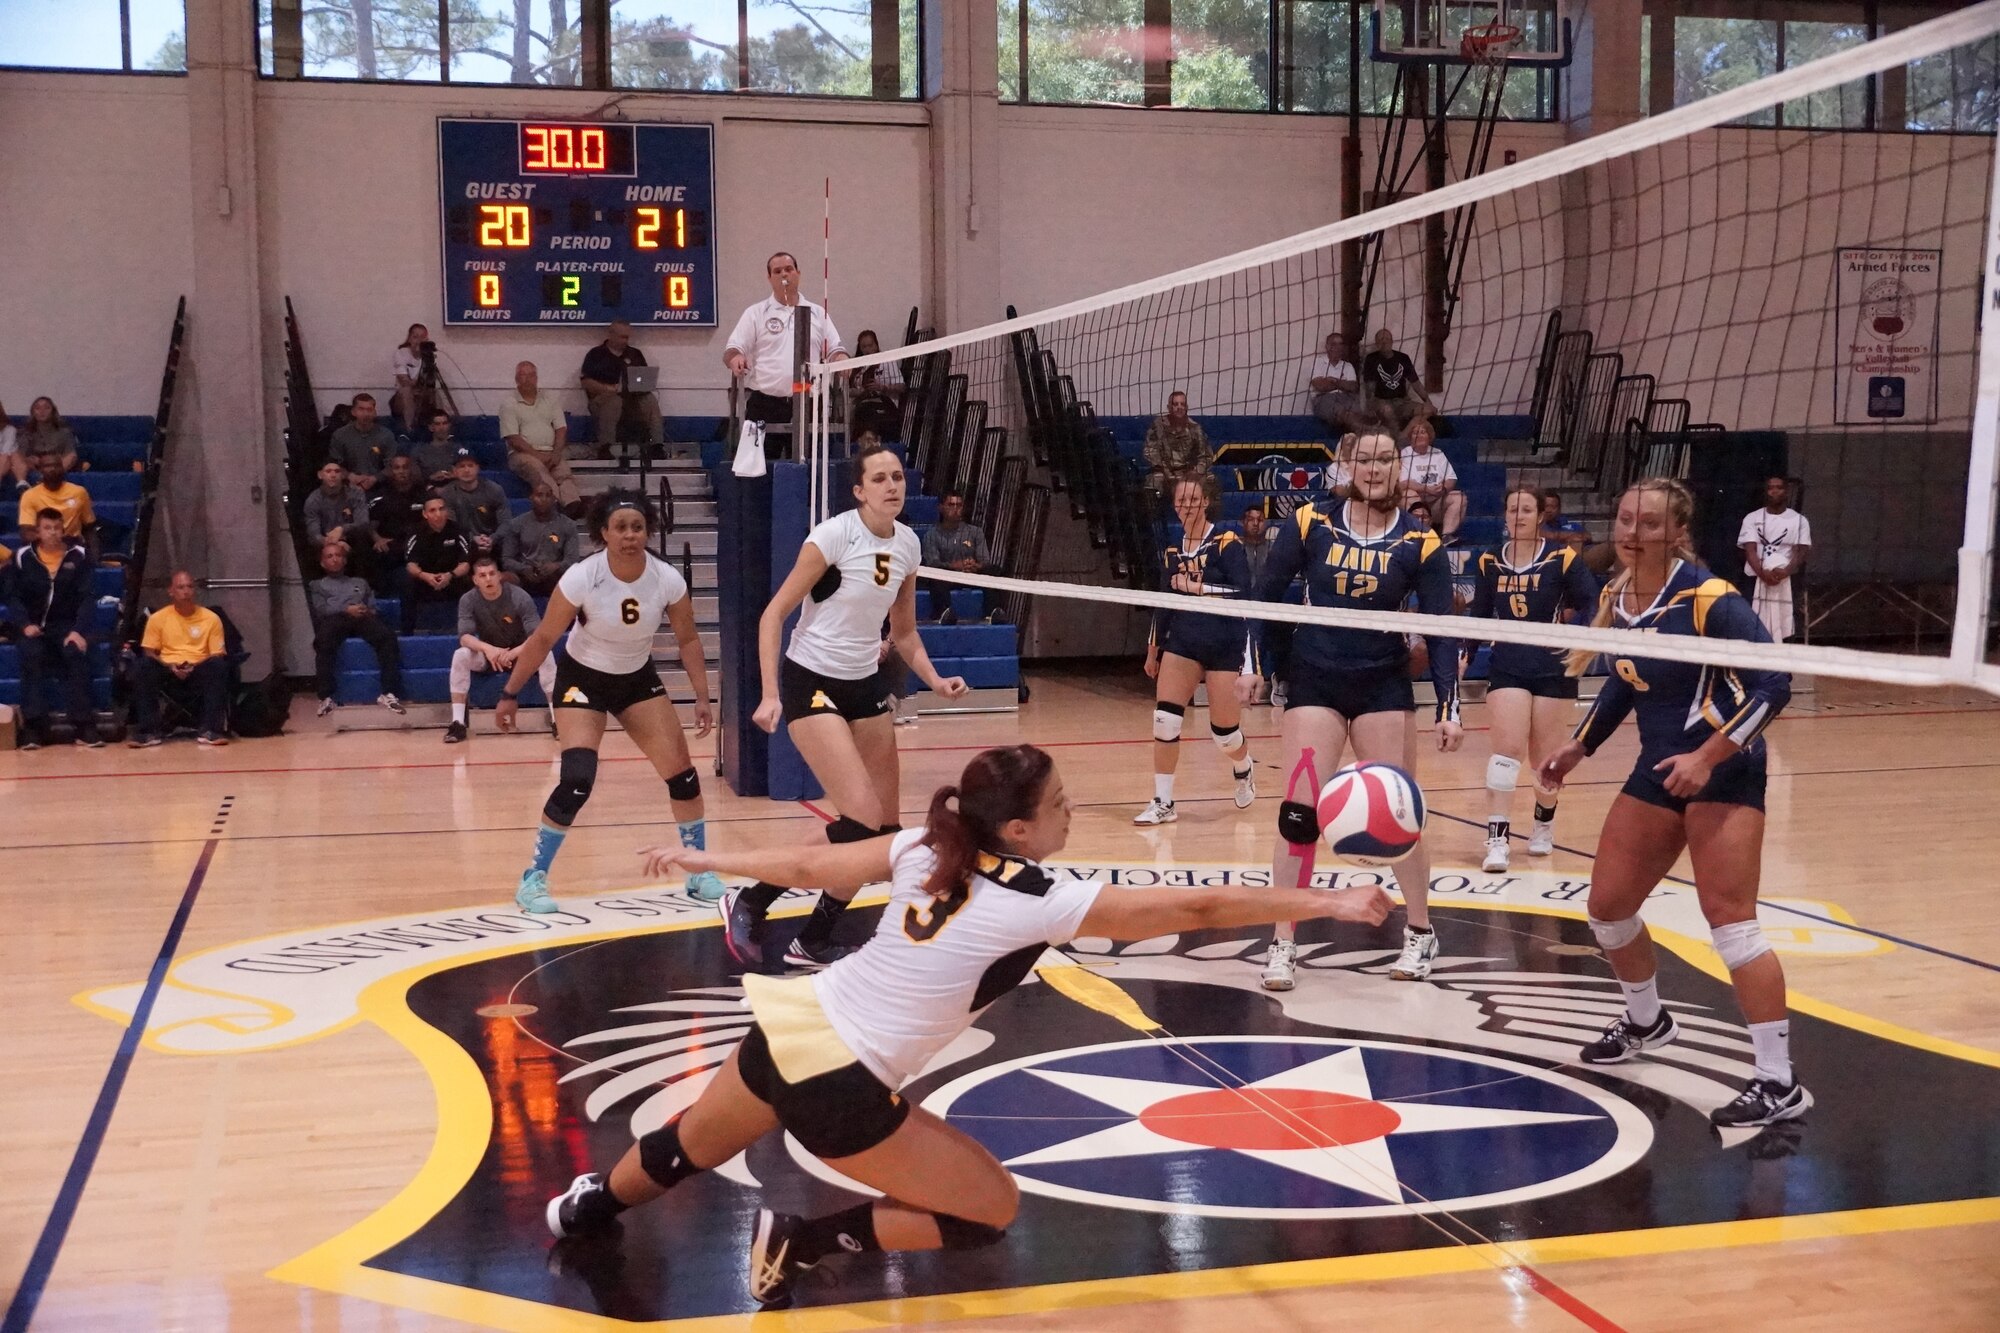 Photo of the 2018 Armed Forces Volleyball Championship